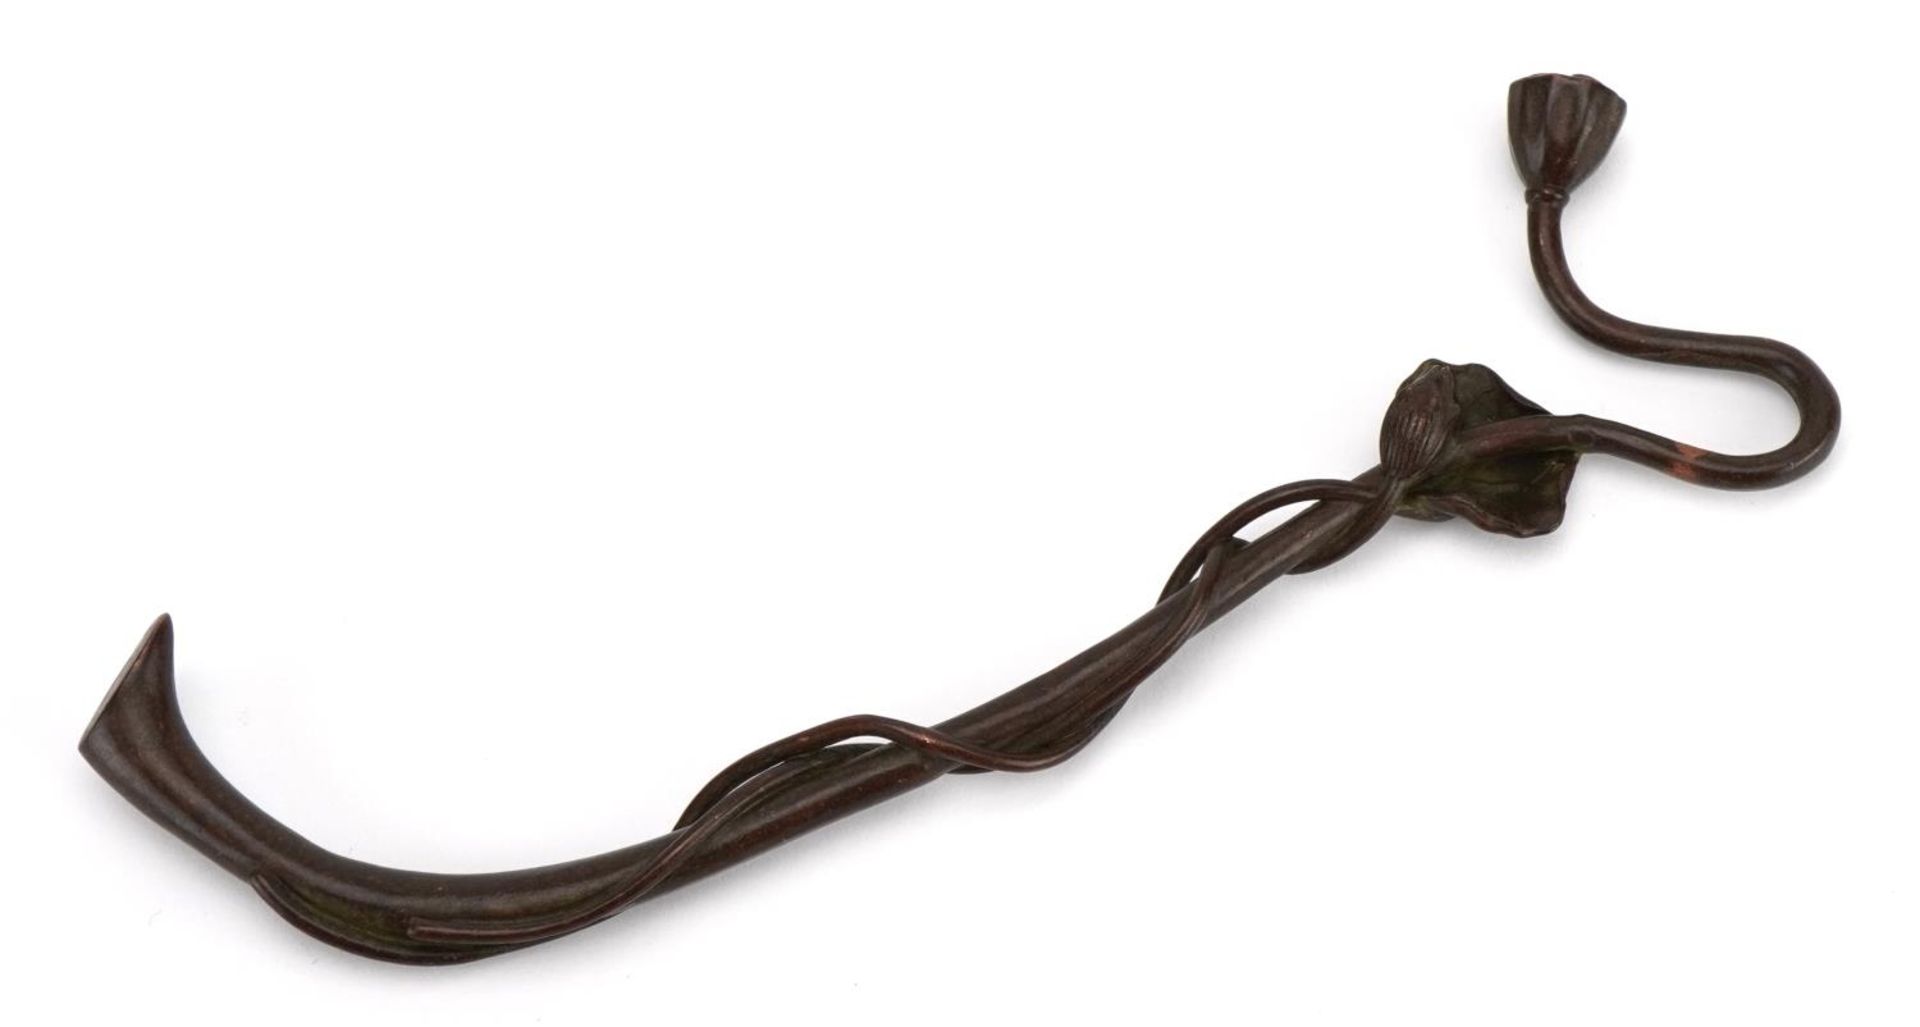 Japanese patinated bronze flower with impressed mark, 19cm in length